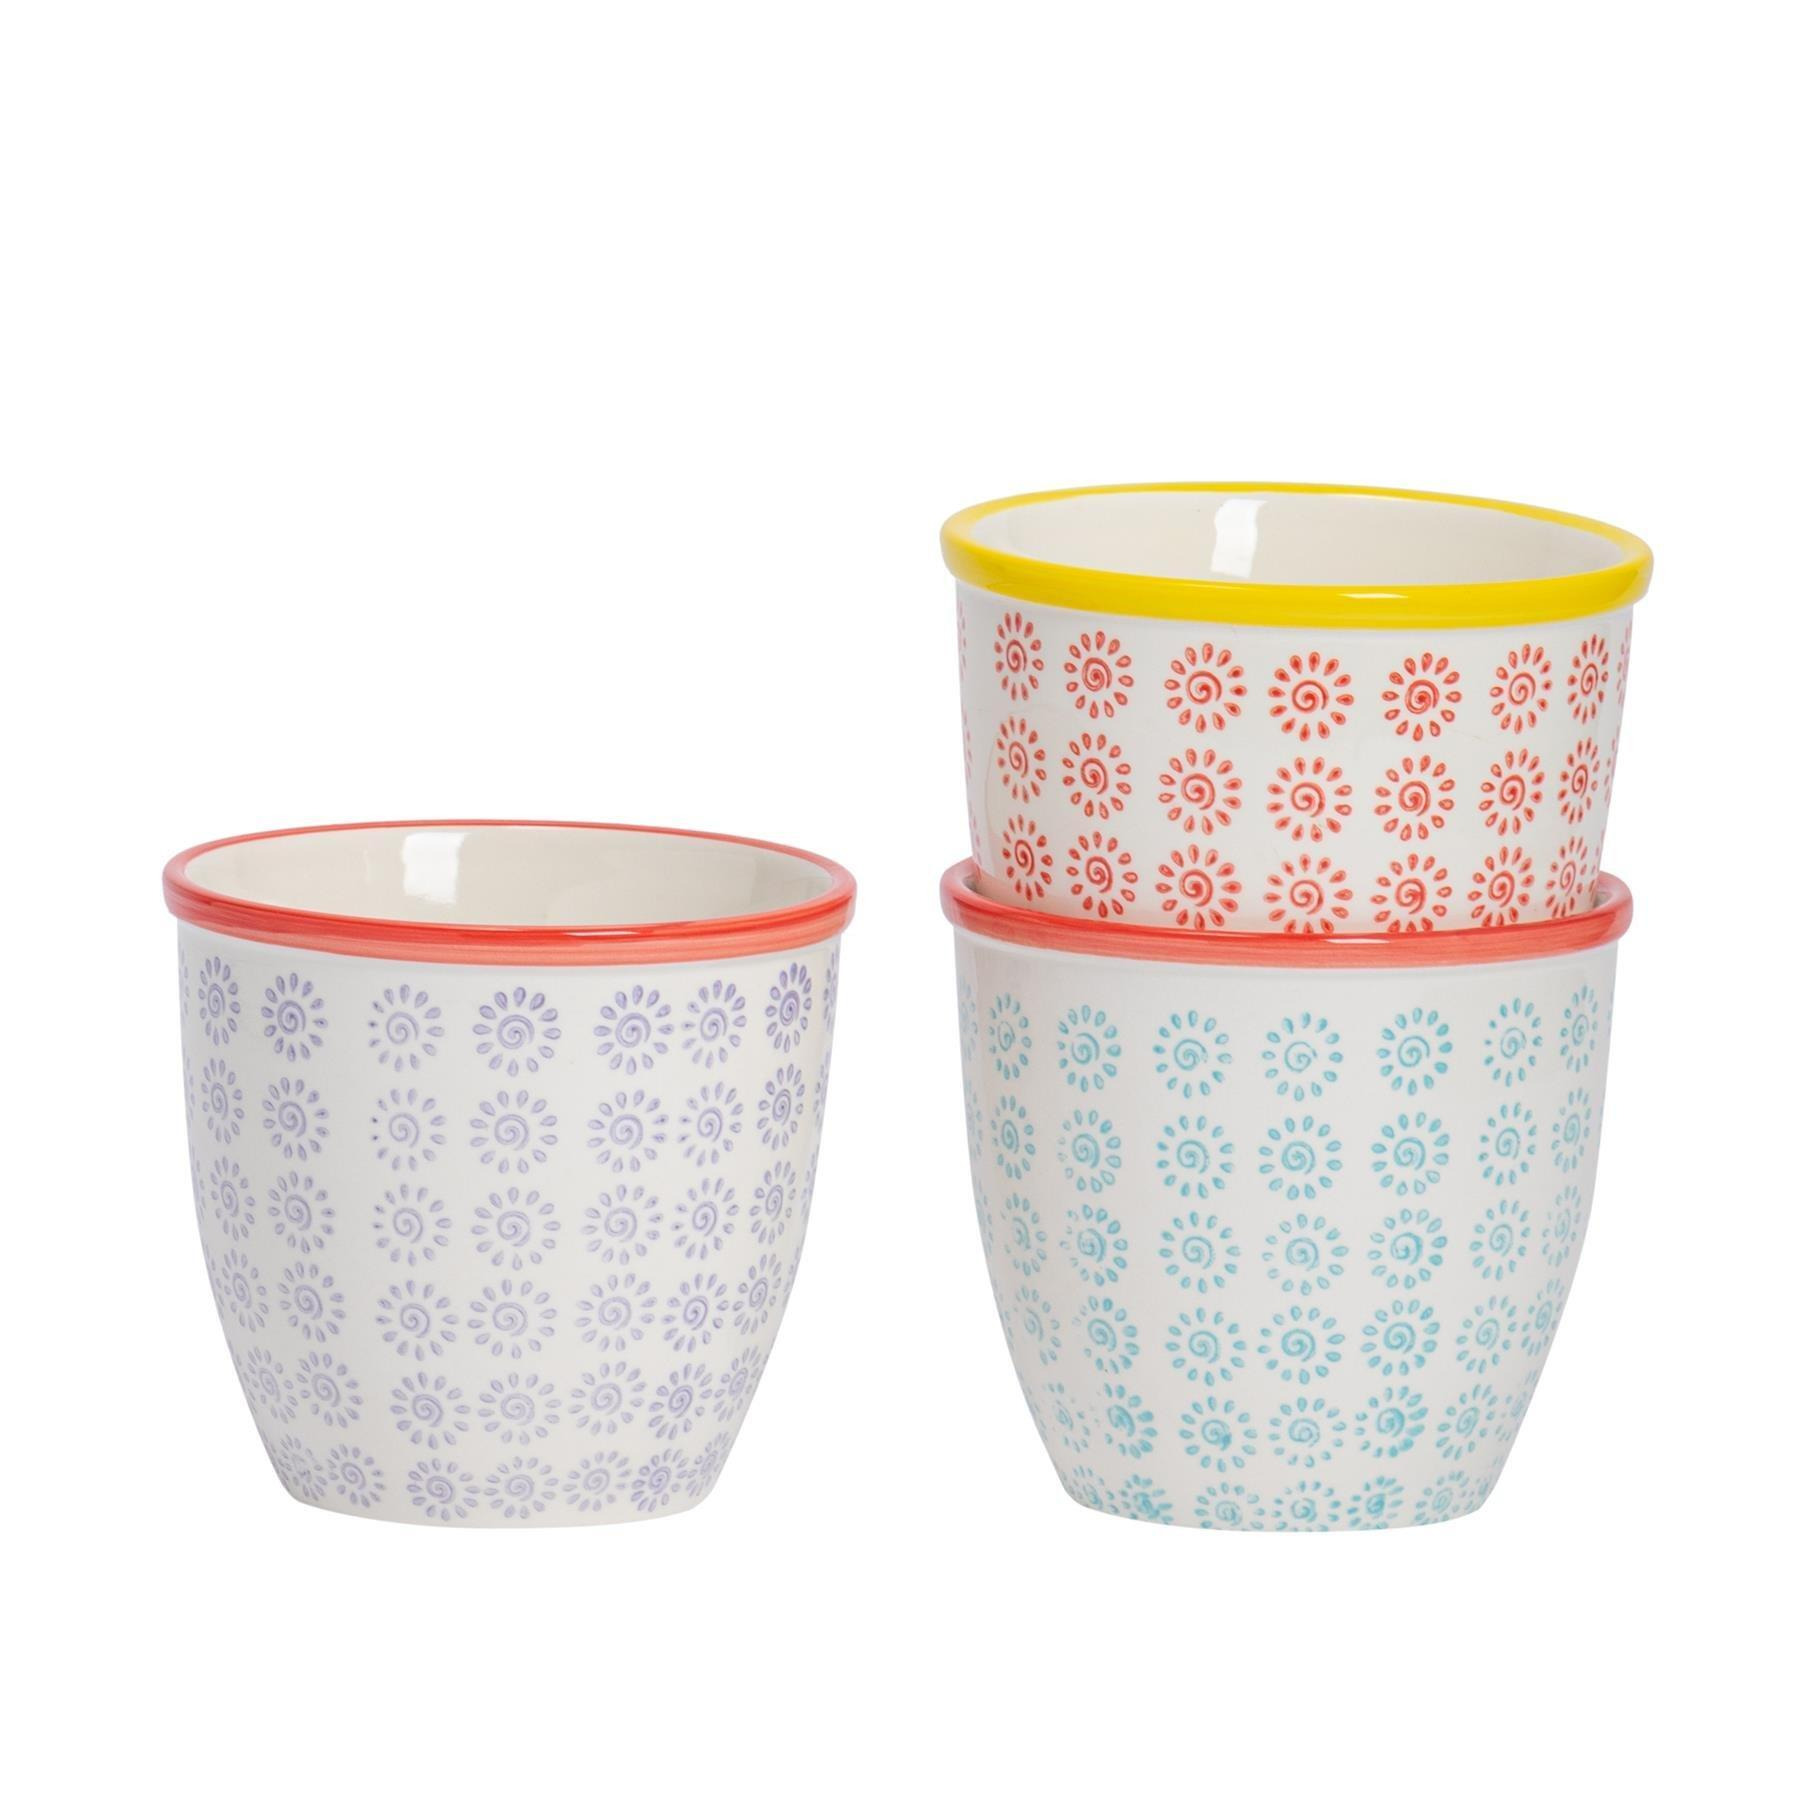 Hand-Printed Plant Pots 14cm 3 Colours Pack of 3 - image 1